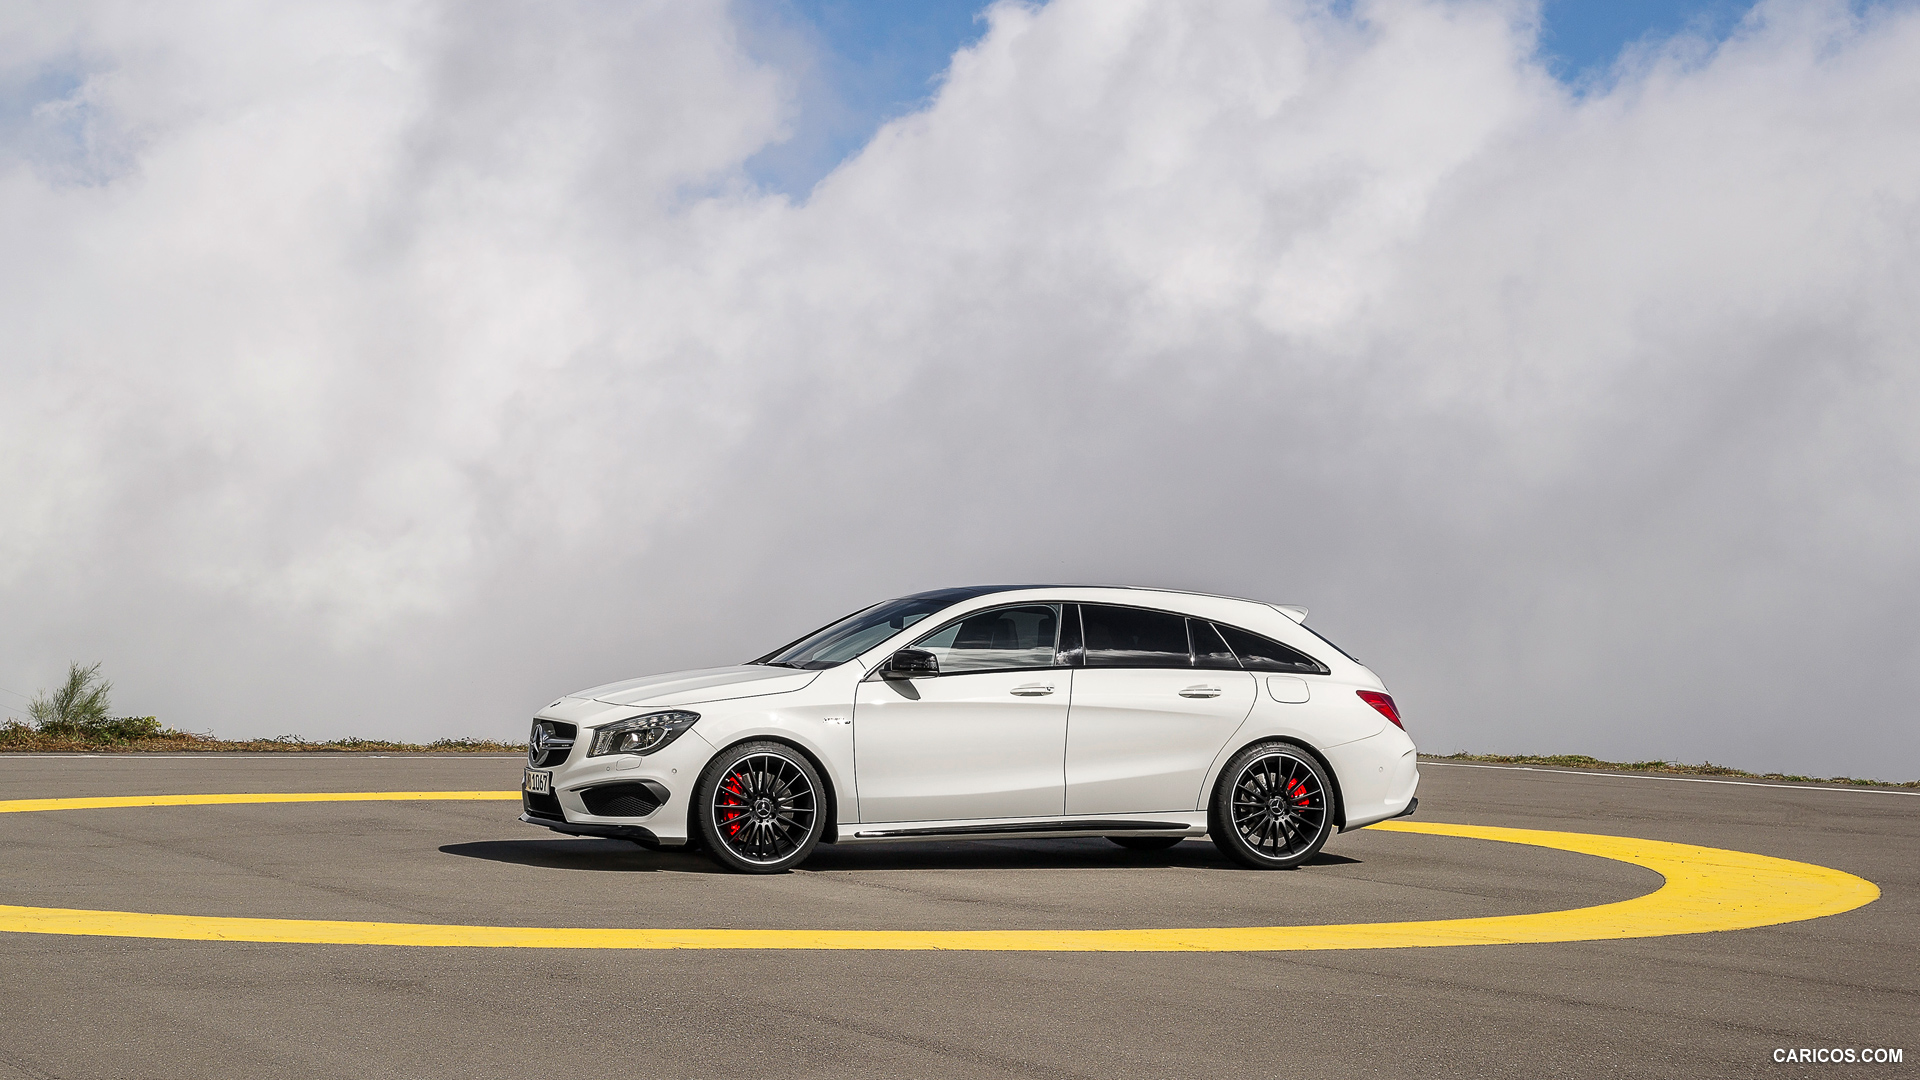 2015 Mercedes-Benz CLA 45 AMG Shooting Brake (Calcite White) - Side, #15 of 70